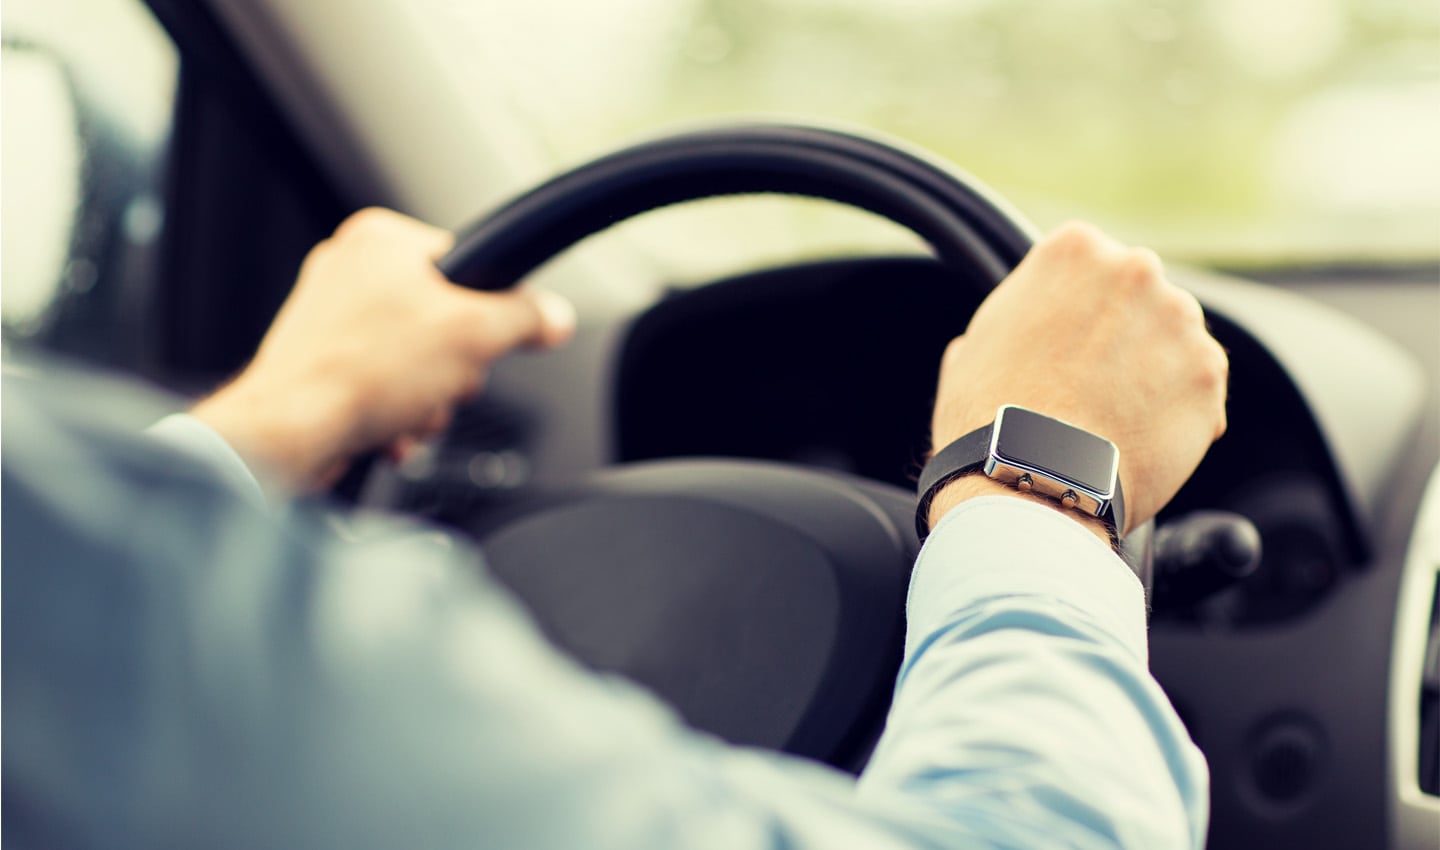 Wearables like smartwatches could help drivers connect more deeply with their cars and expand the scope of driving.